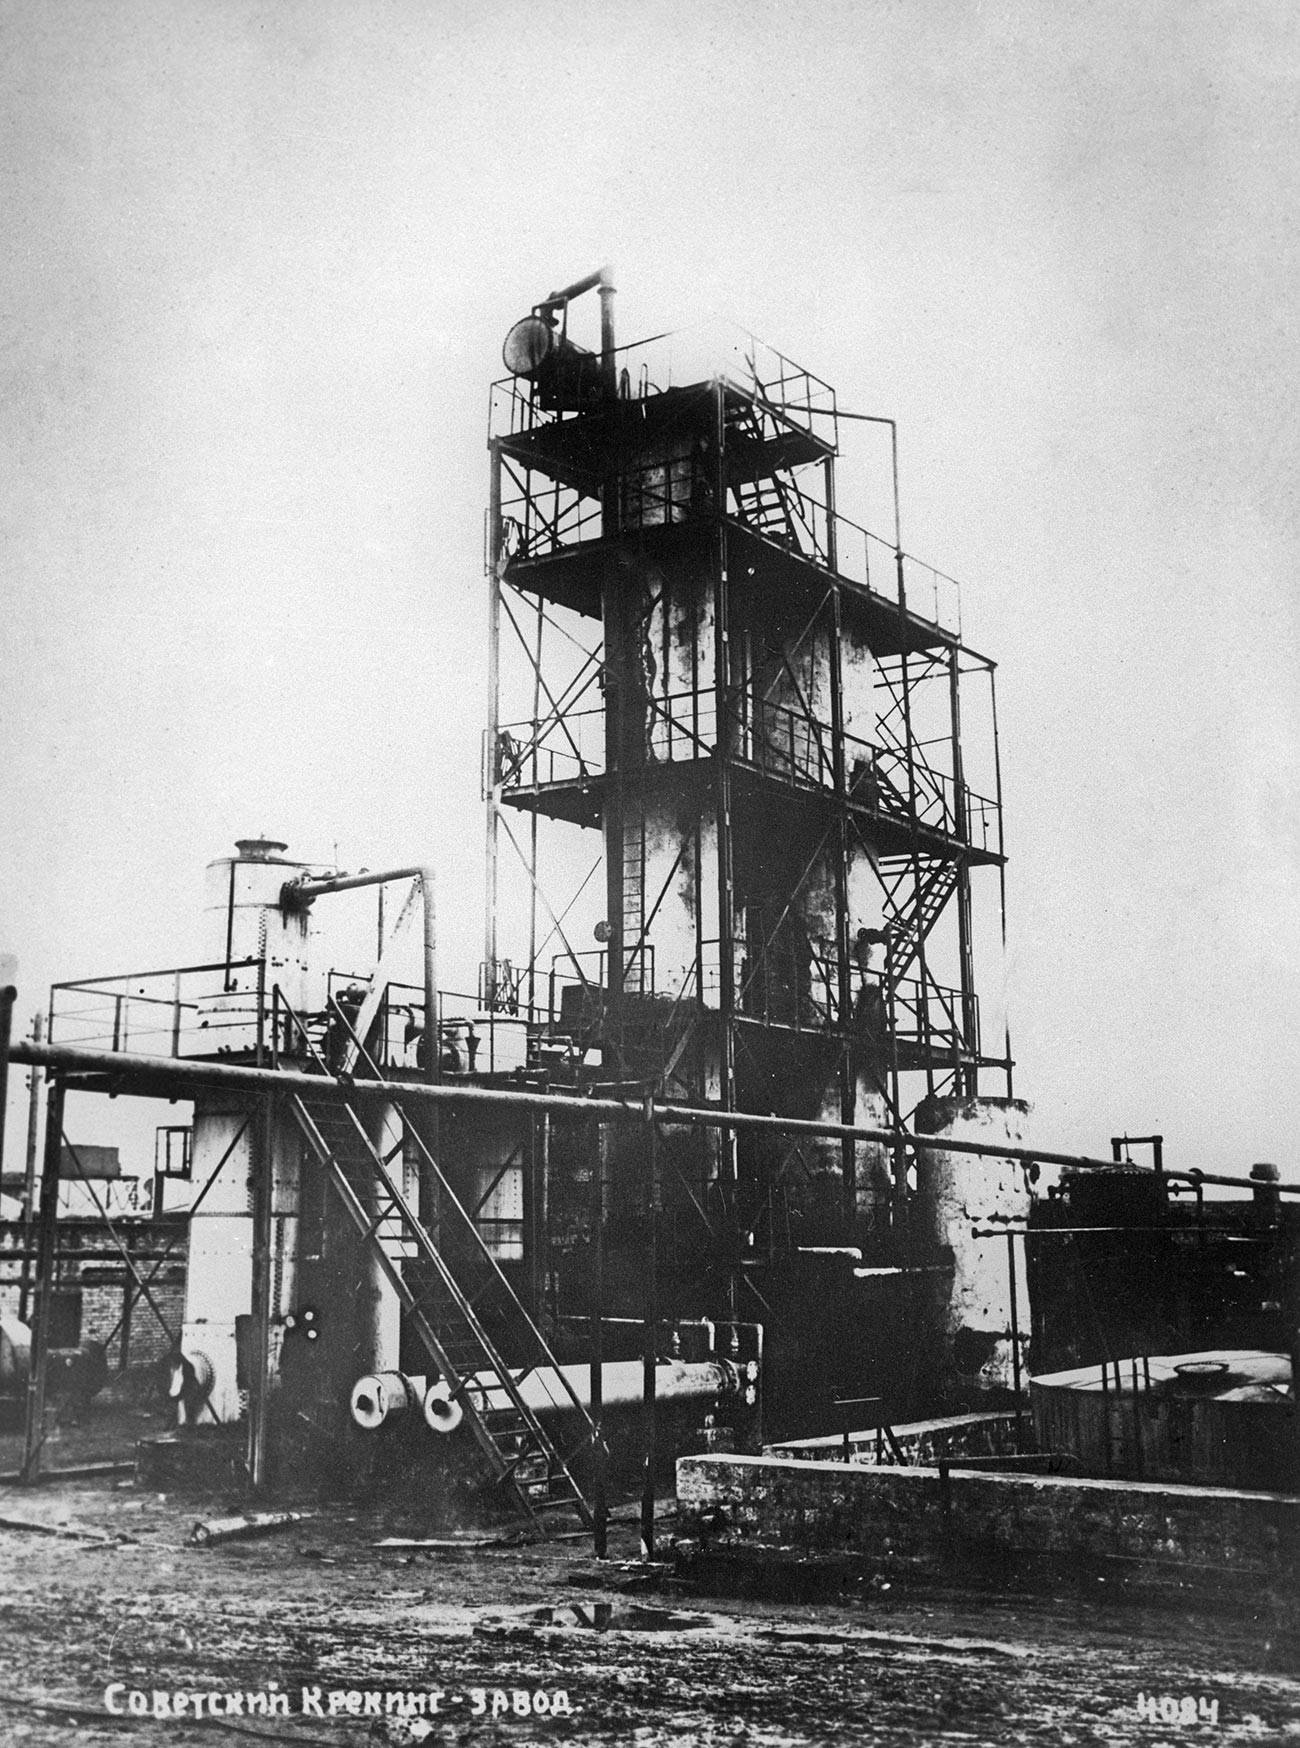 An installation for thermal cracking of oil following Shukhov's method, Baku, USSR, 1934